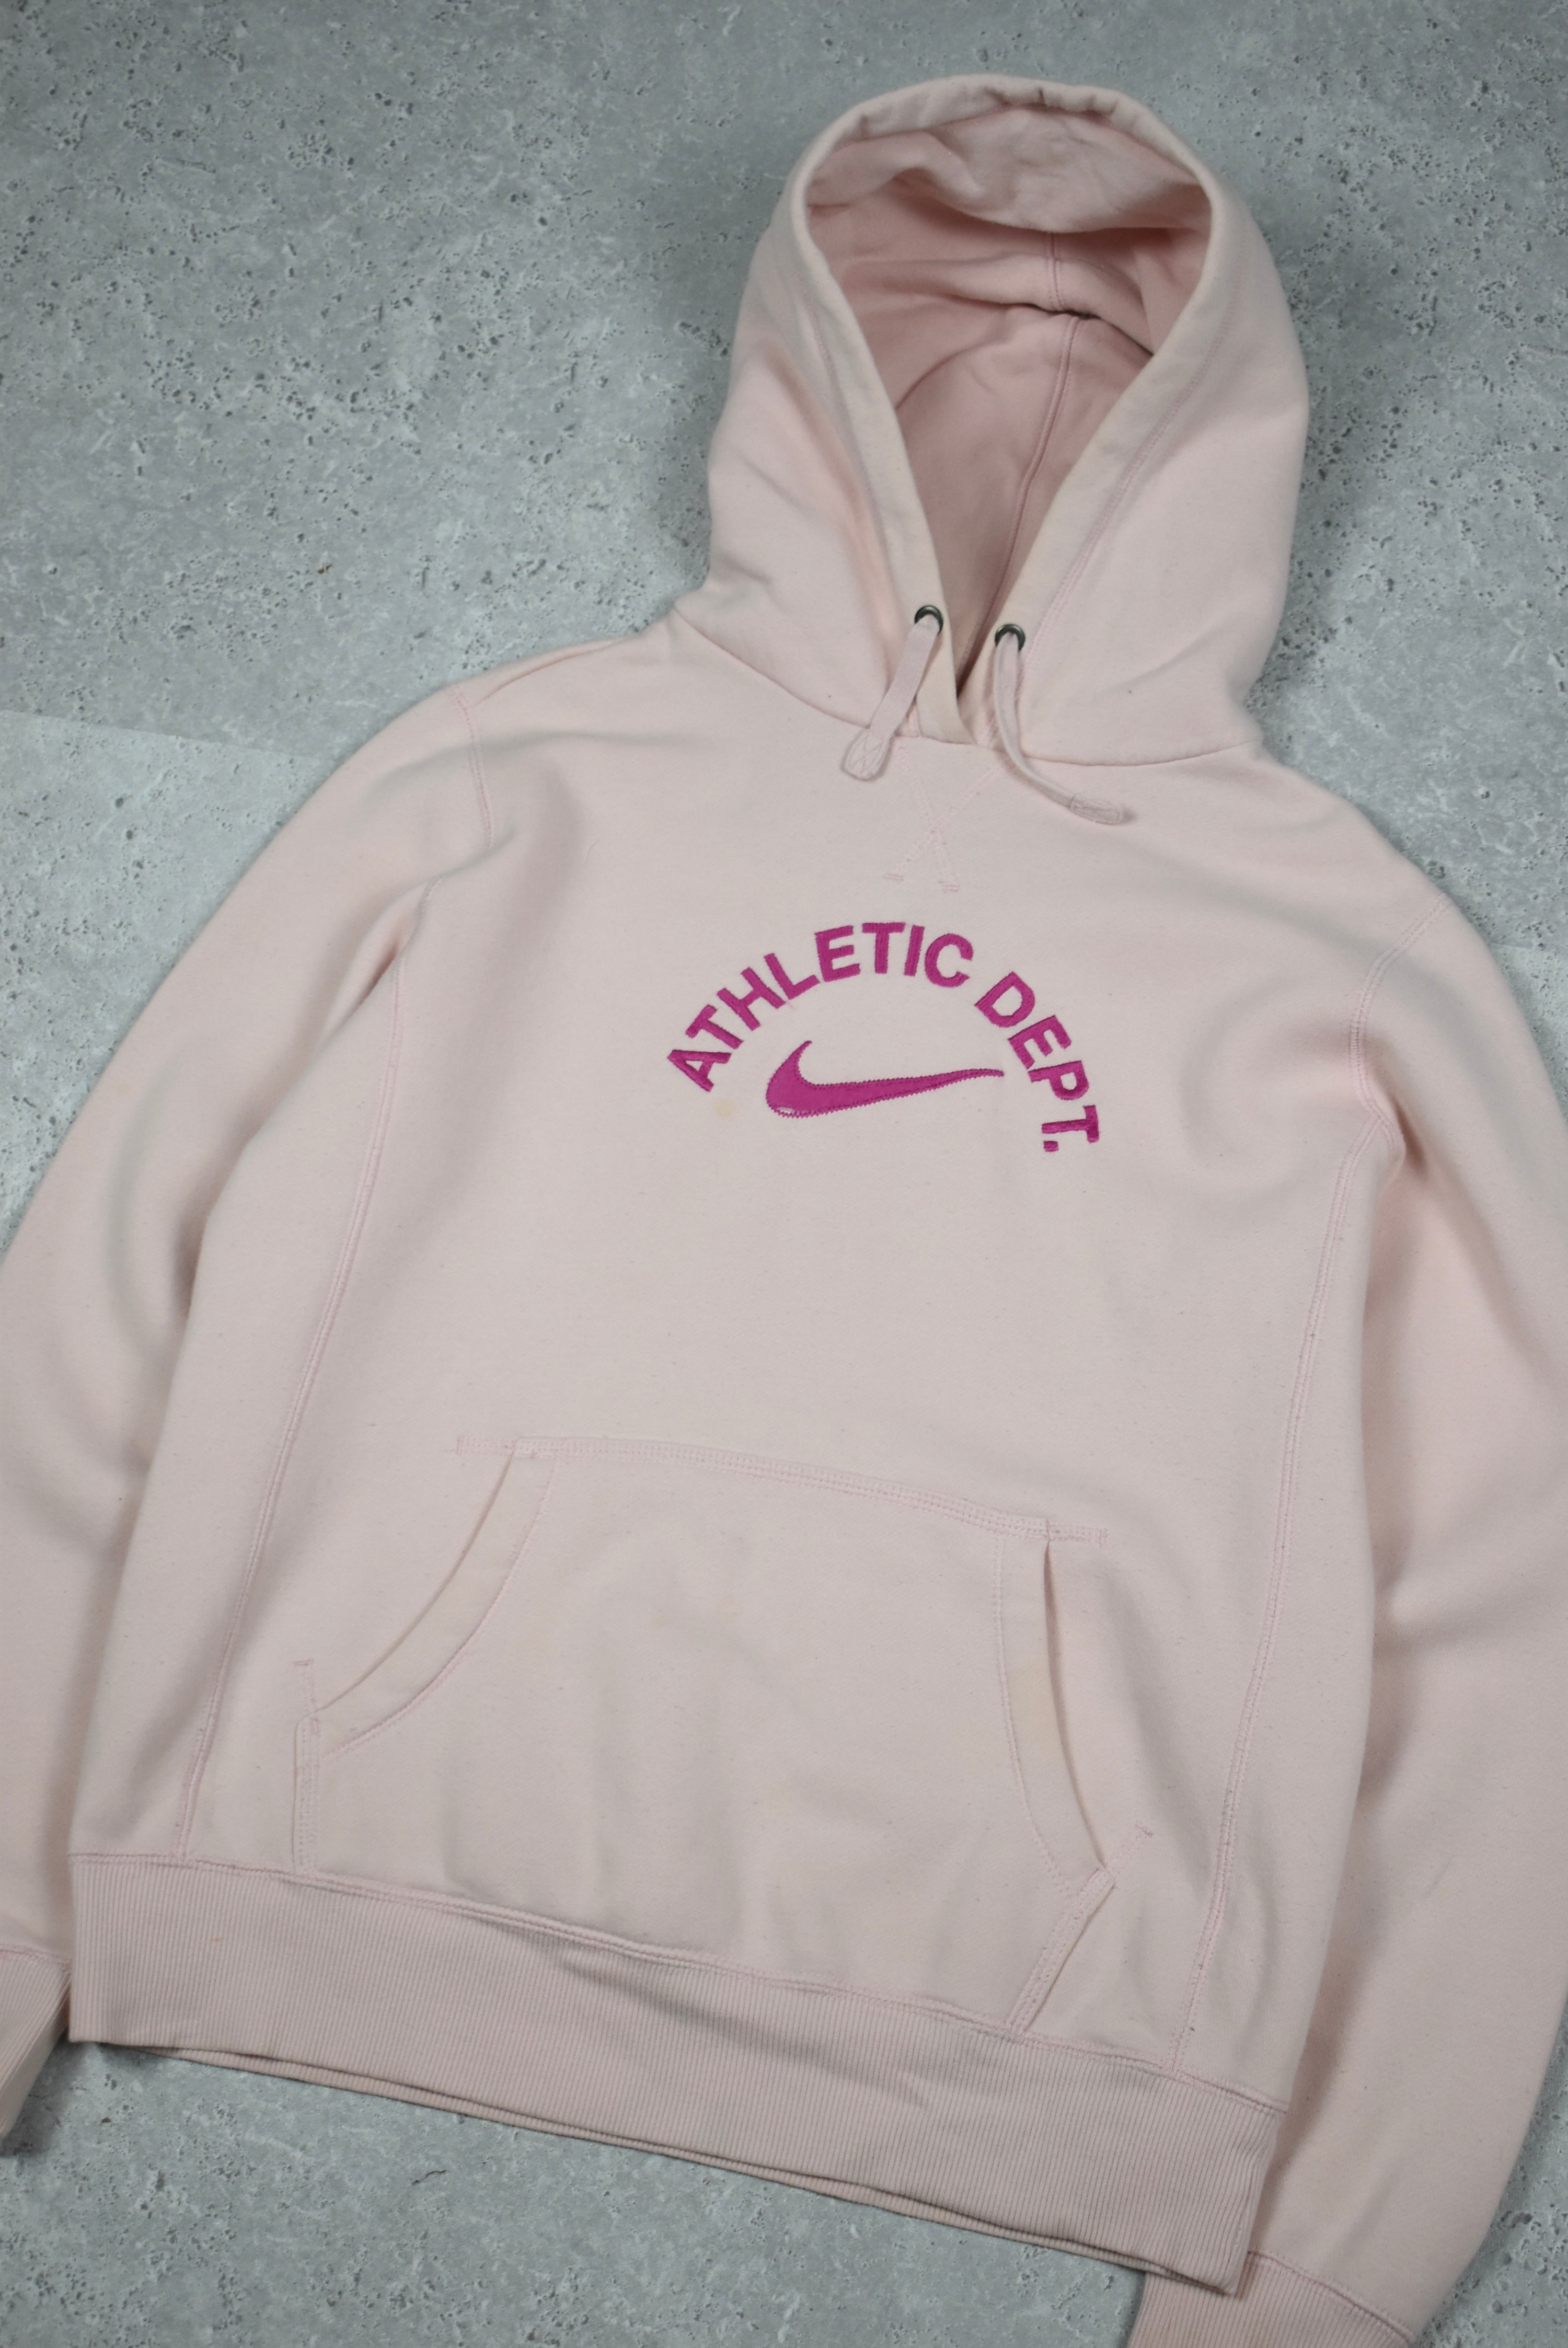 Vintage Nike Embroidered Hoodie Women's Small